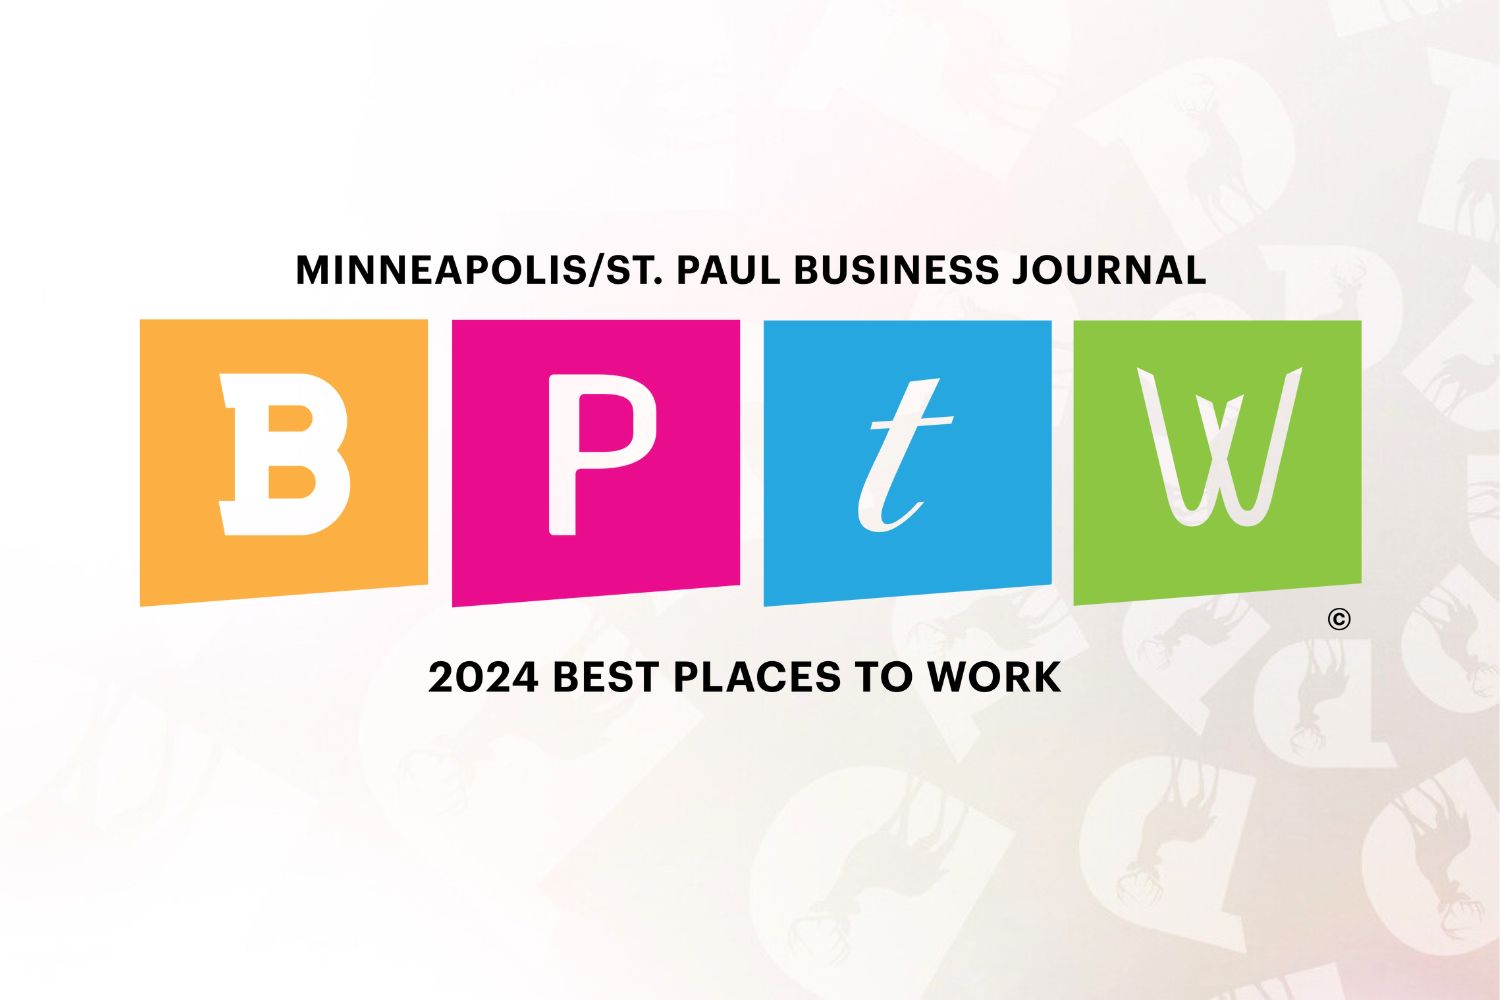 Deerwood Bank Selected as a 2024 Best Places to Work Honoree by the MSP Business Journal